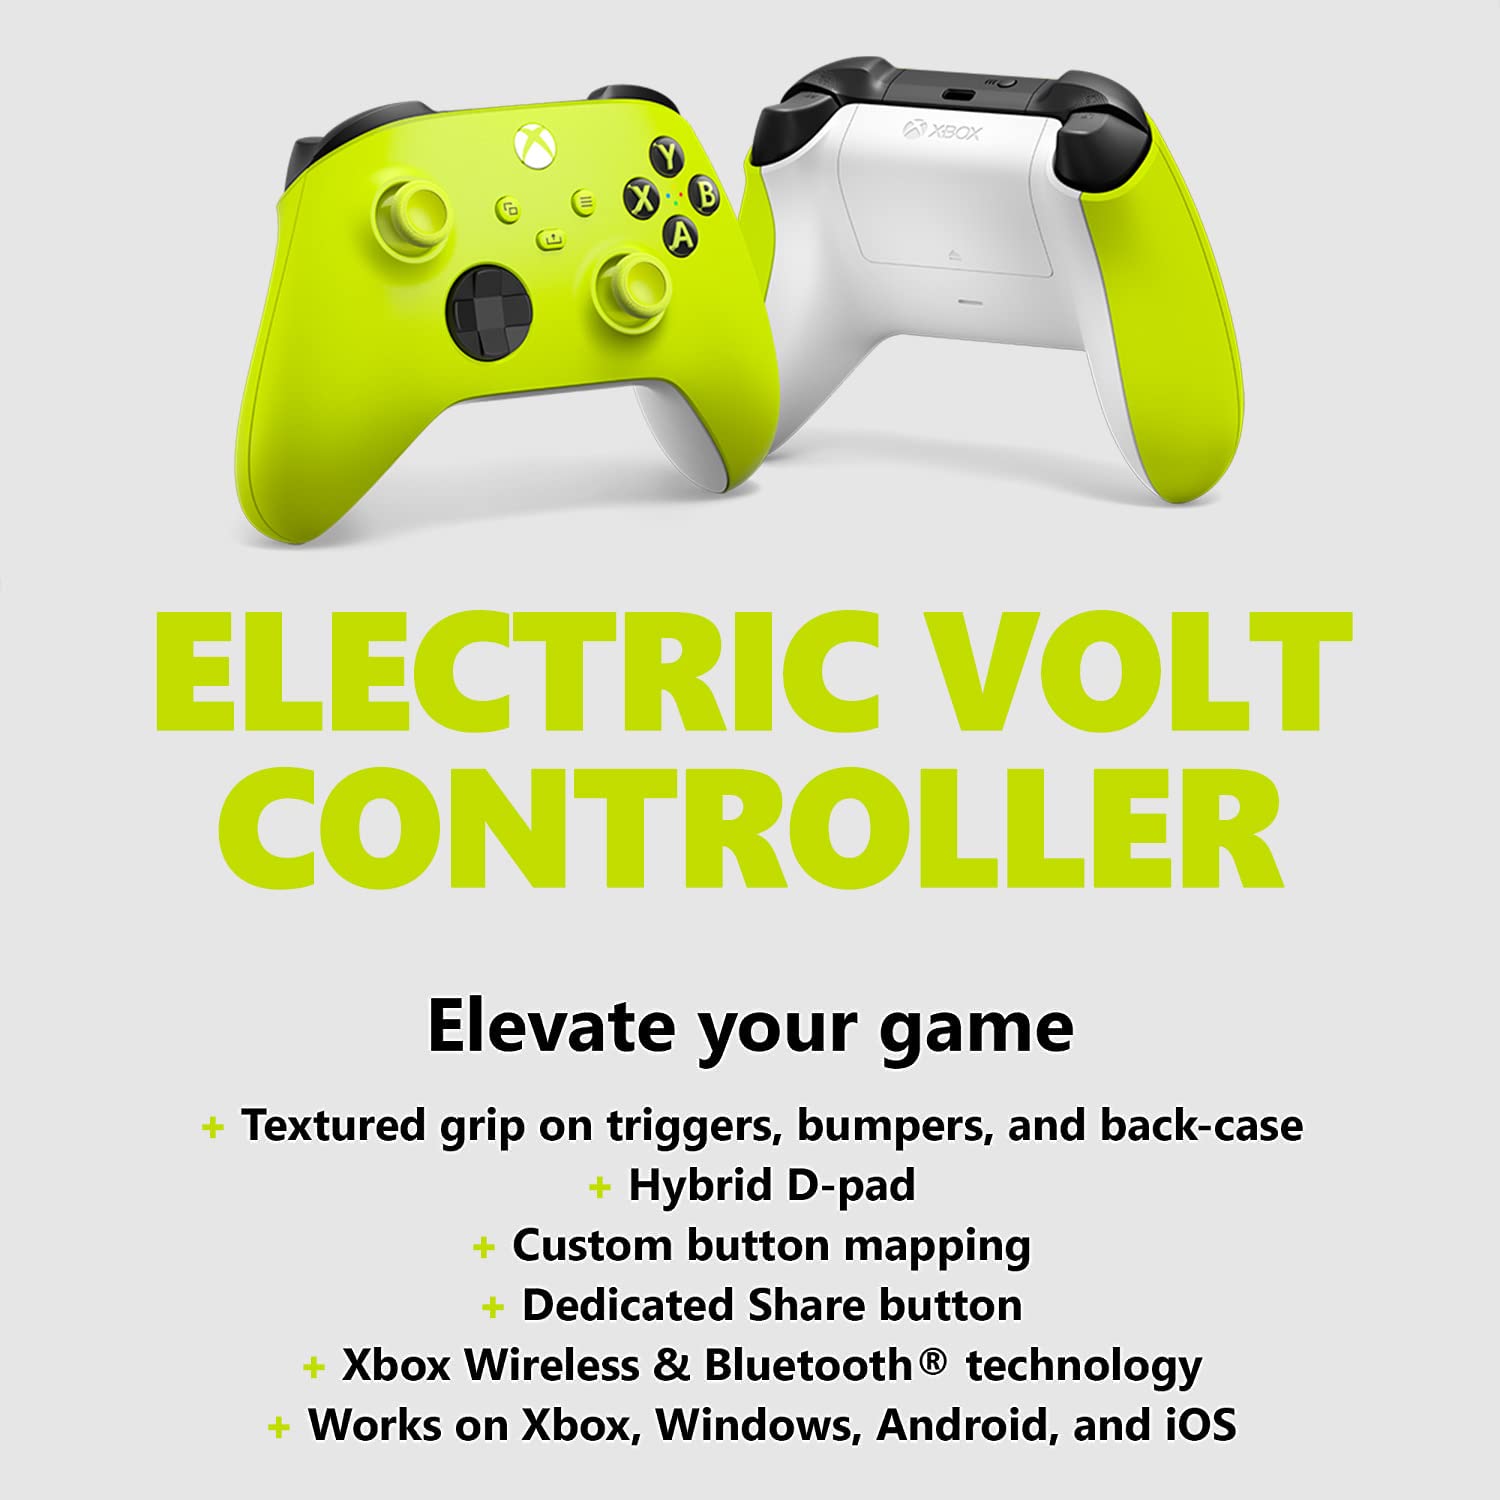 Microsoft Xbox Wireless Controller Electric Volt - Wireless & Bluetooth Connectivity - New Hybrid D-Pad - New Share Button - Featuring Textured Grip - Easily Pair & Switch Between Devices